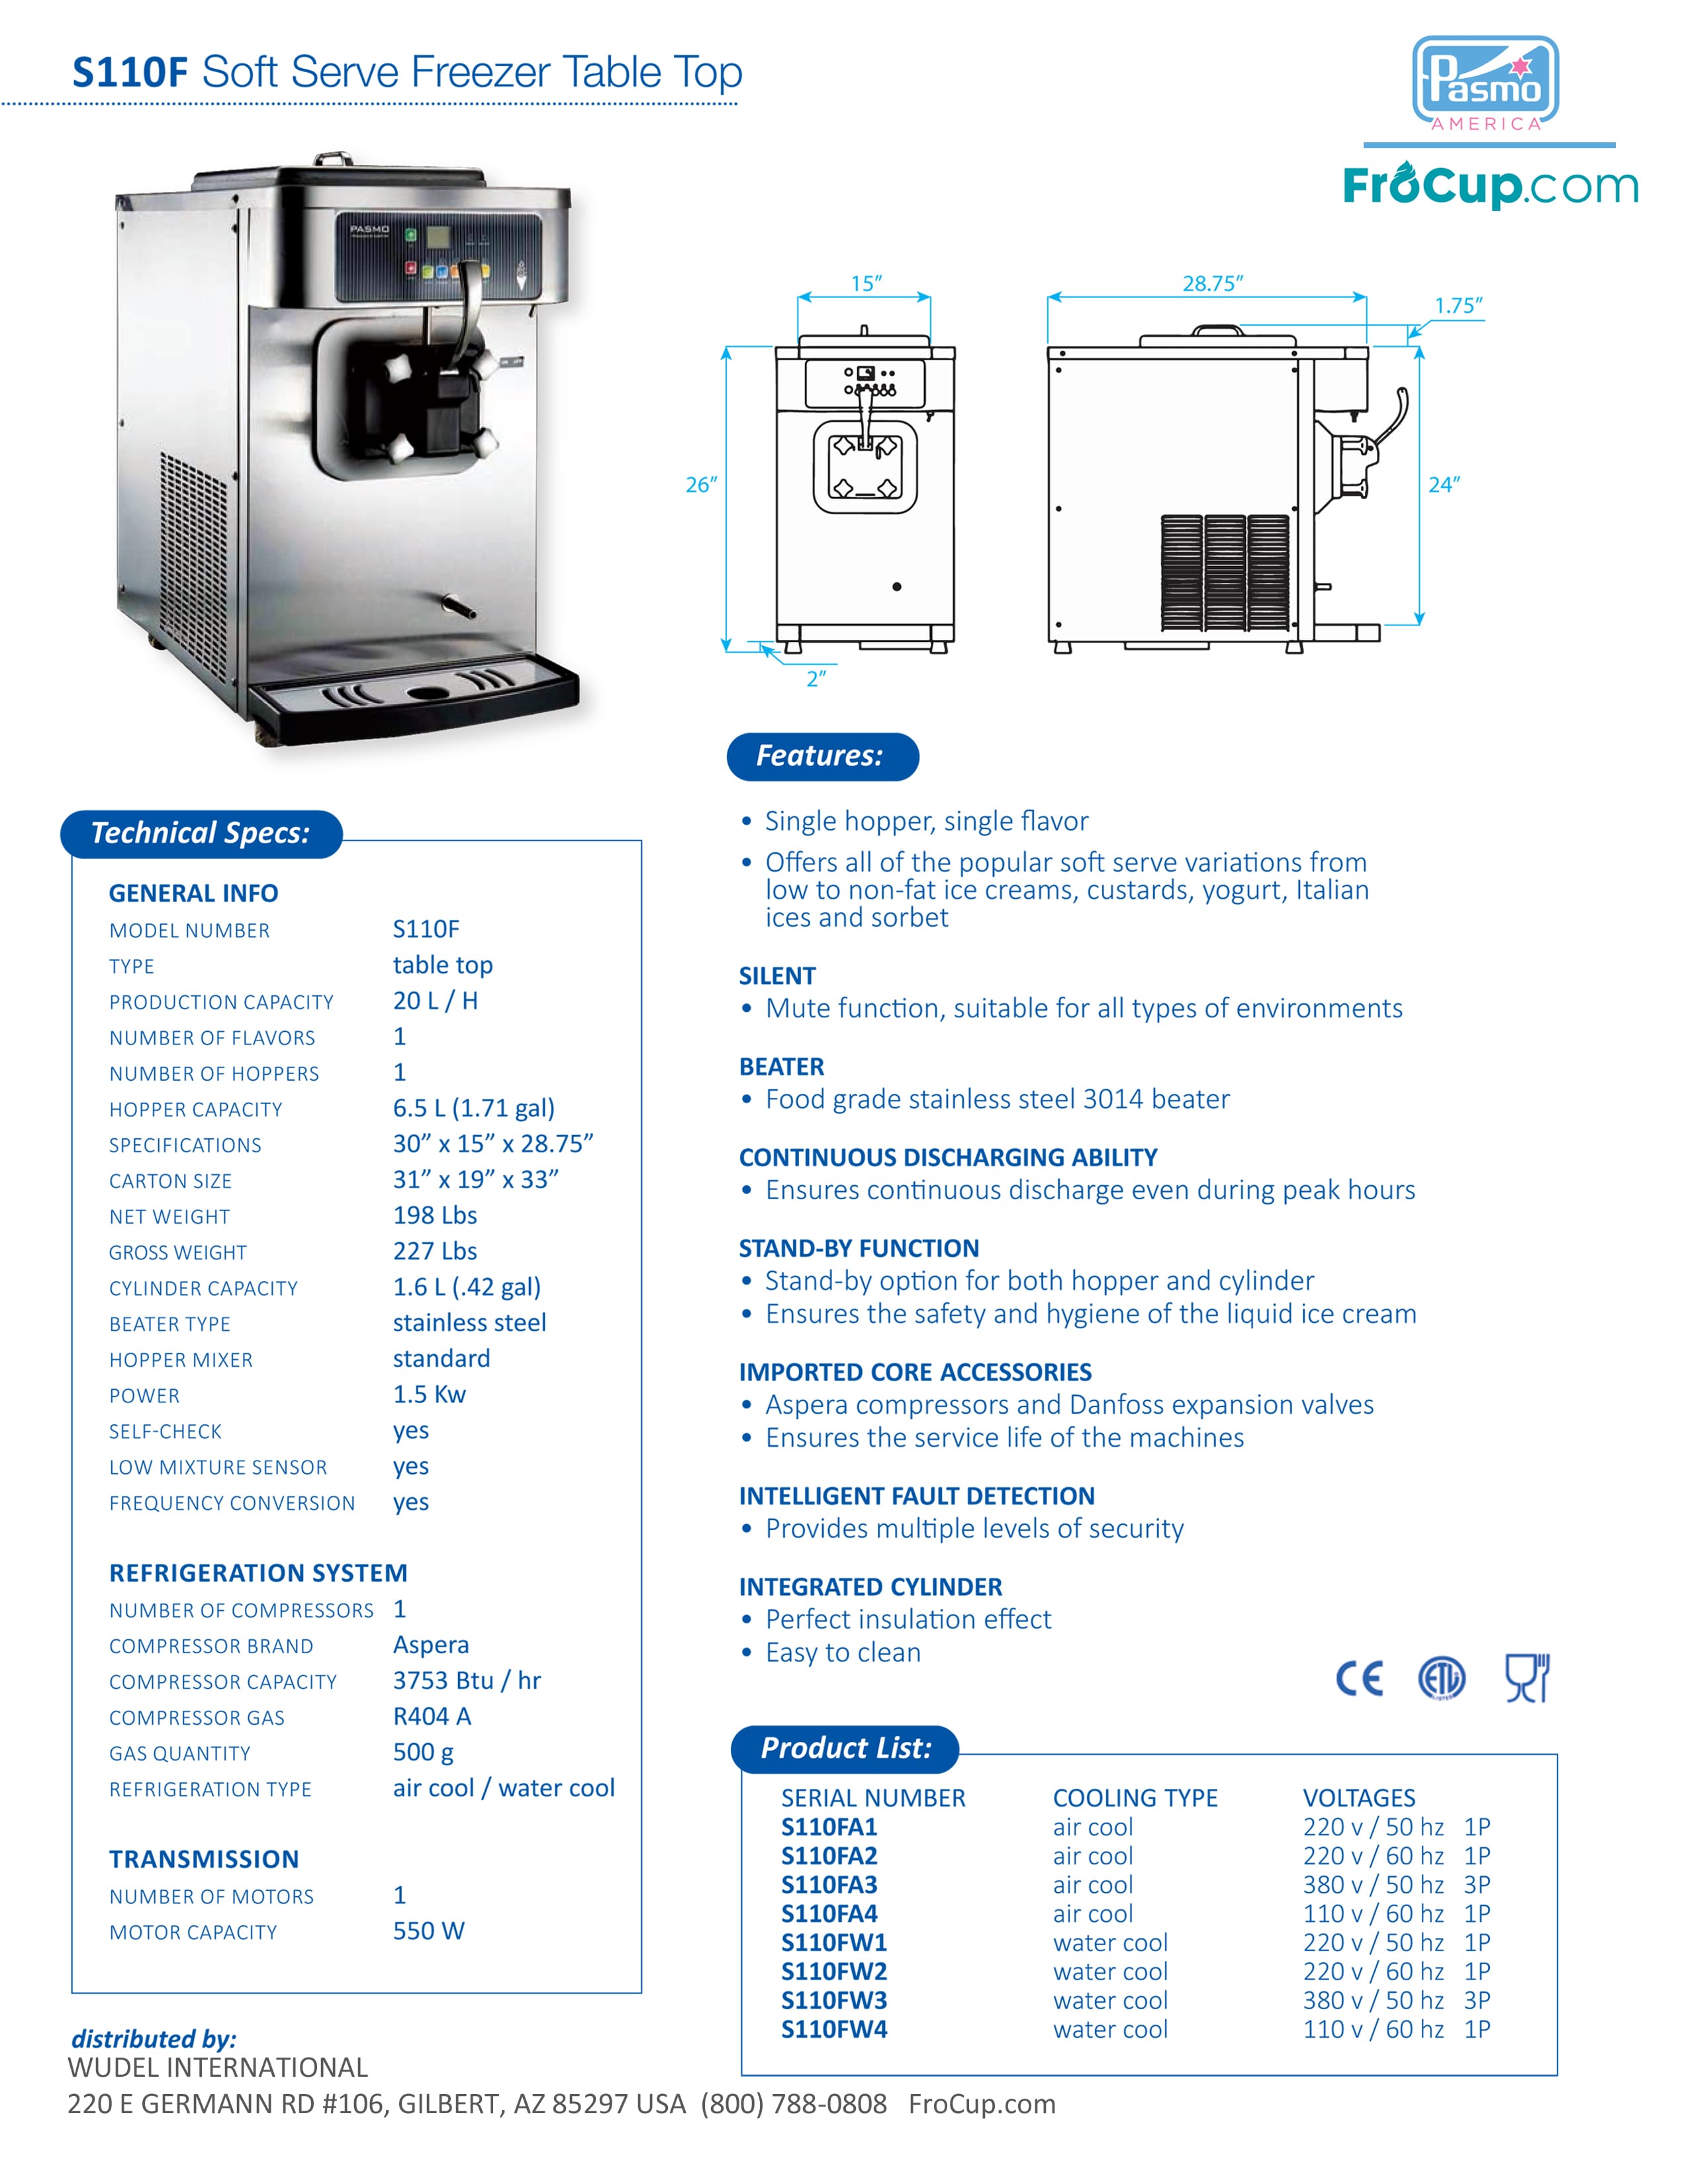 https://frocup.com/wp-content/uploads/2016/11/PASMO-spec-sheet-S110F-series-FroCup.jpg